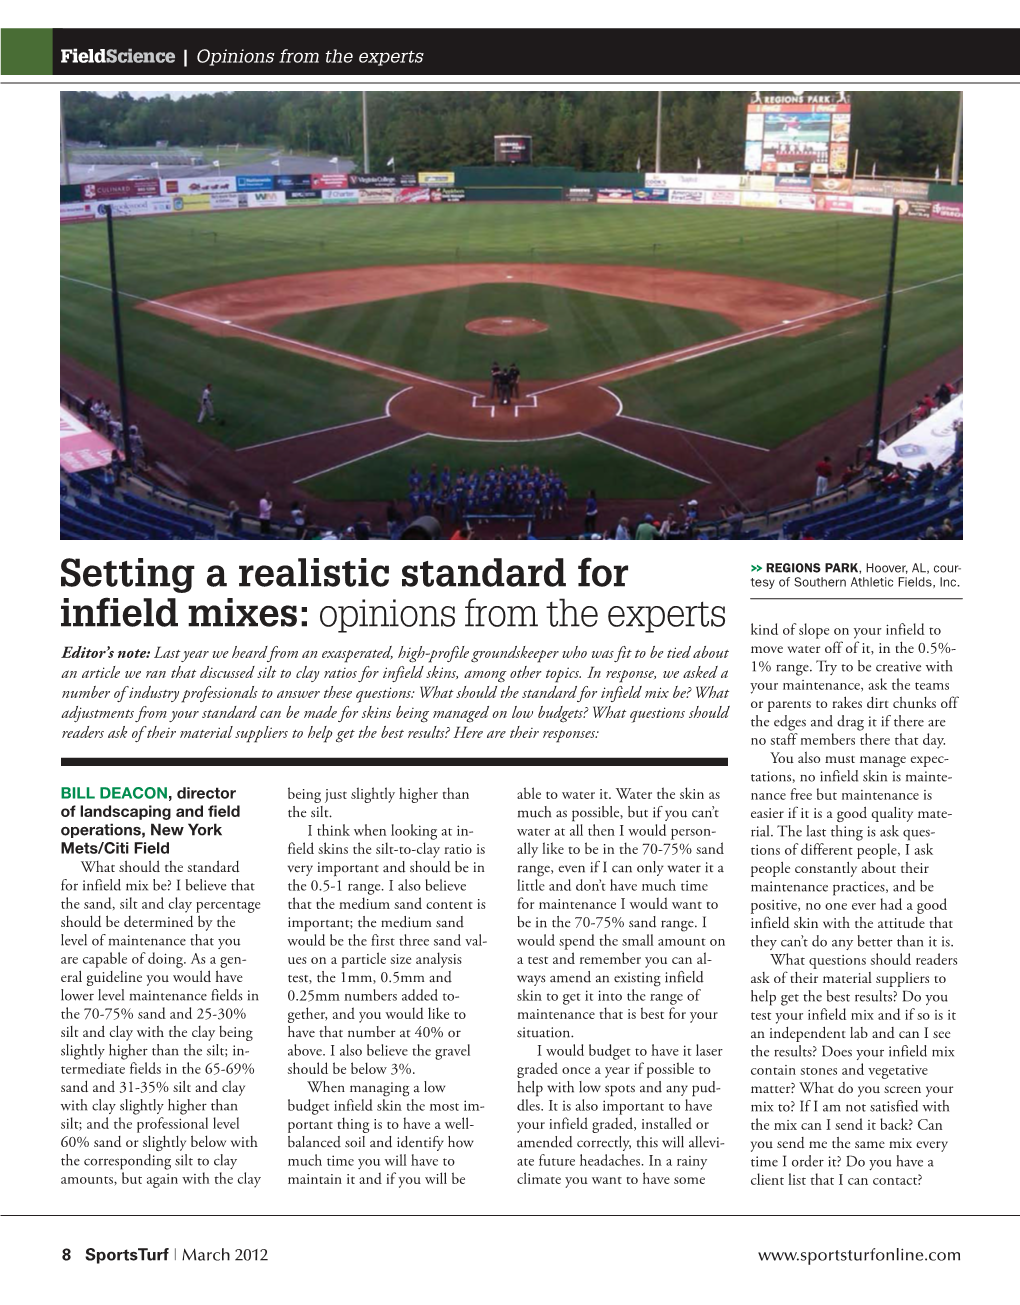 Setting a Realistic Standard for Infield Mixes: Opinions from the Experts